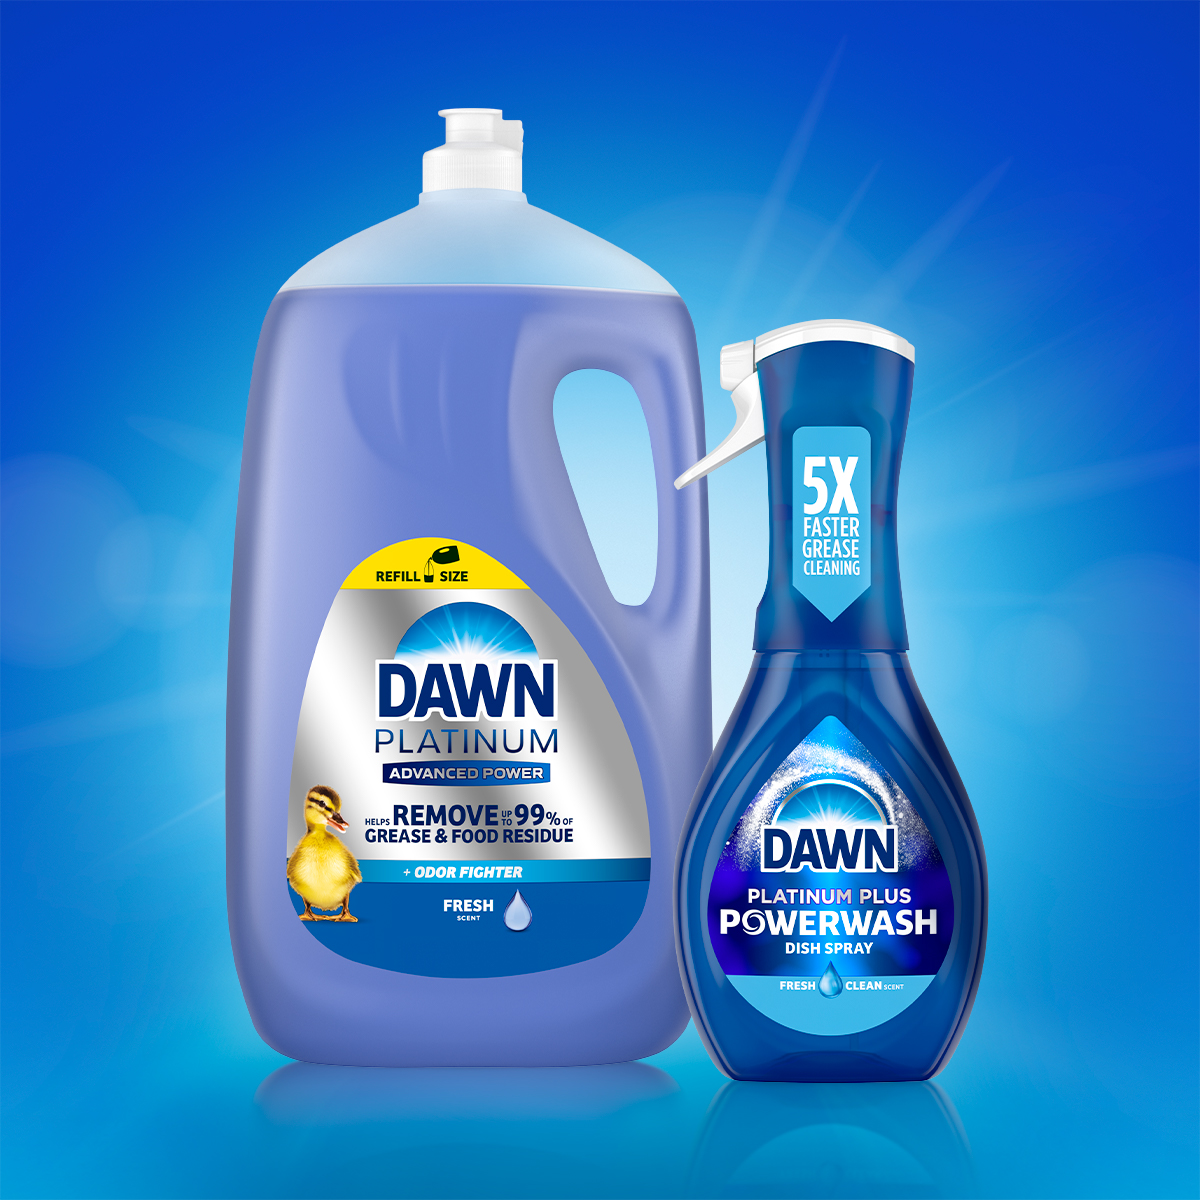 Dawn Platinum Powerwash Dish Spray Review 2024 - The Cleaning Lady